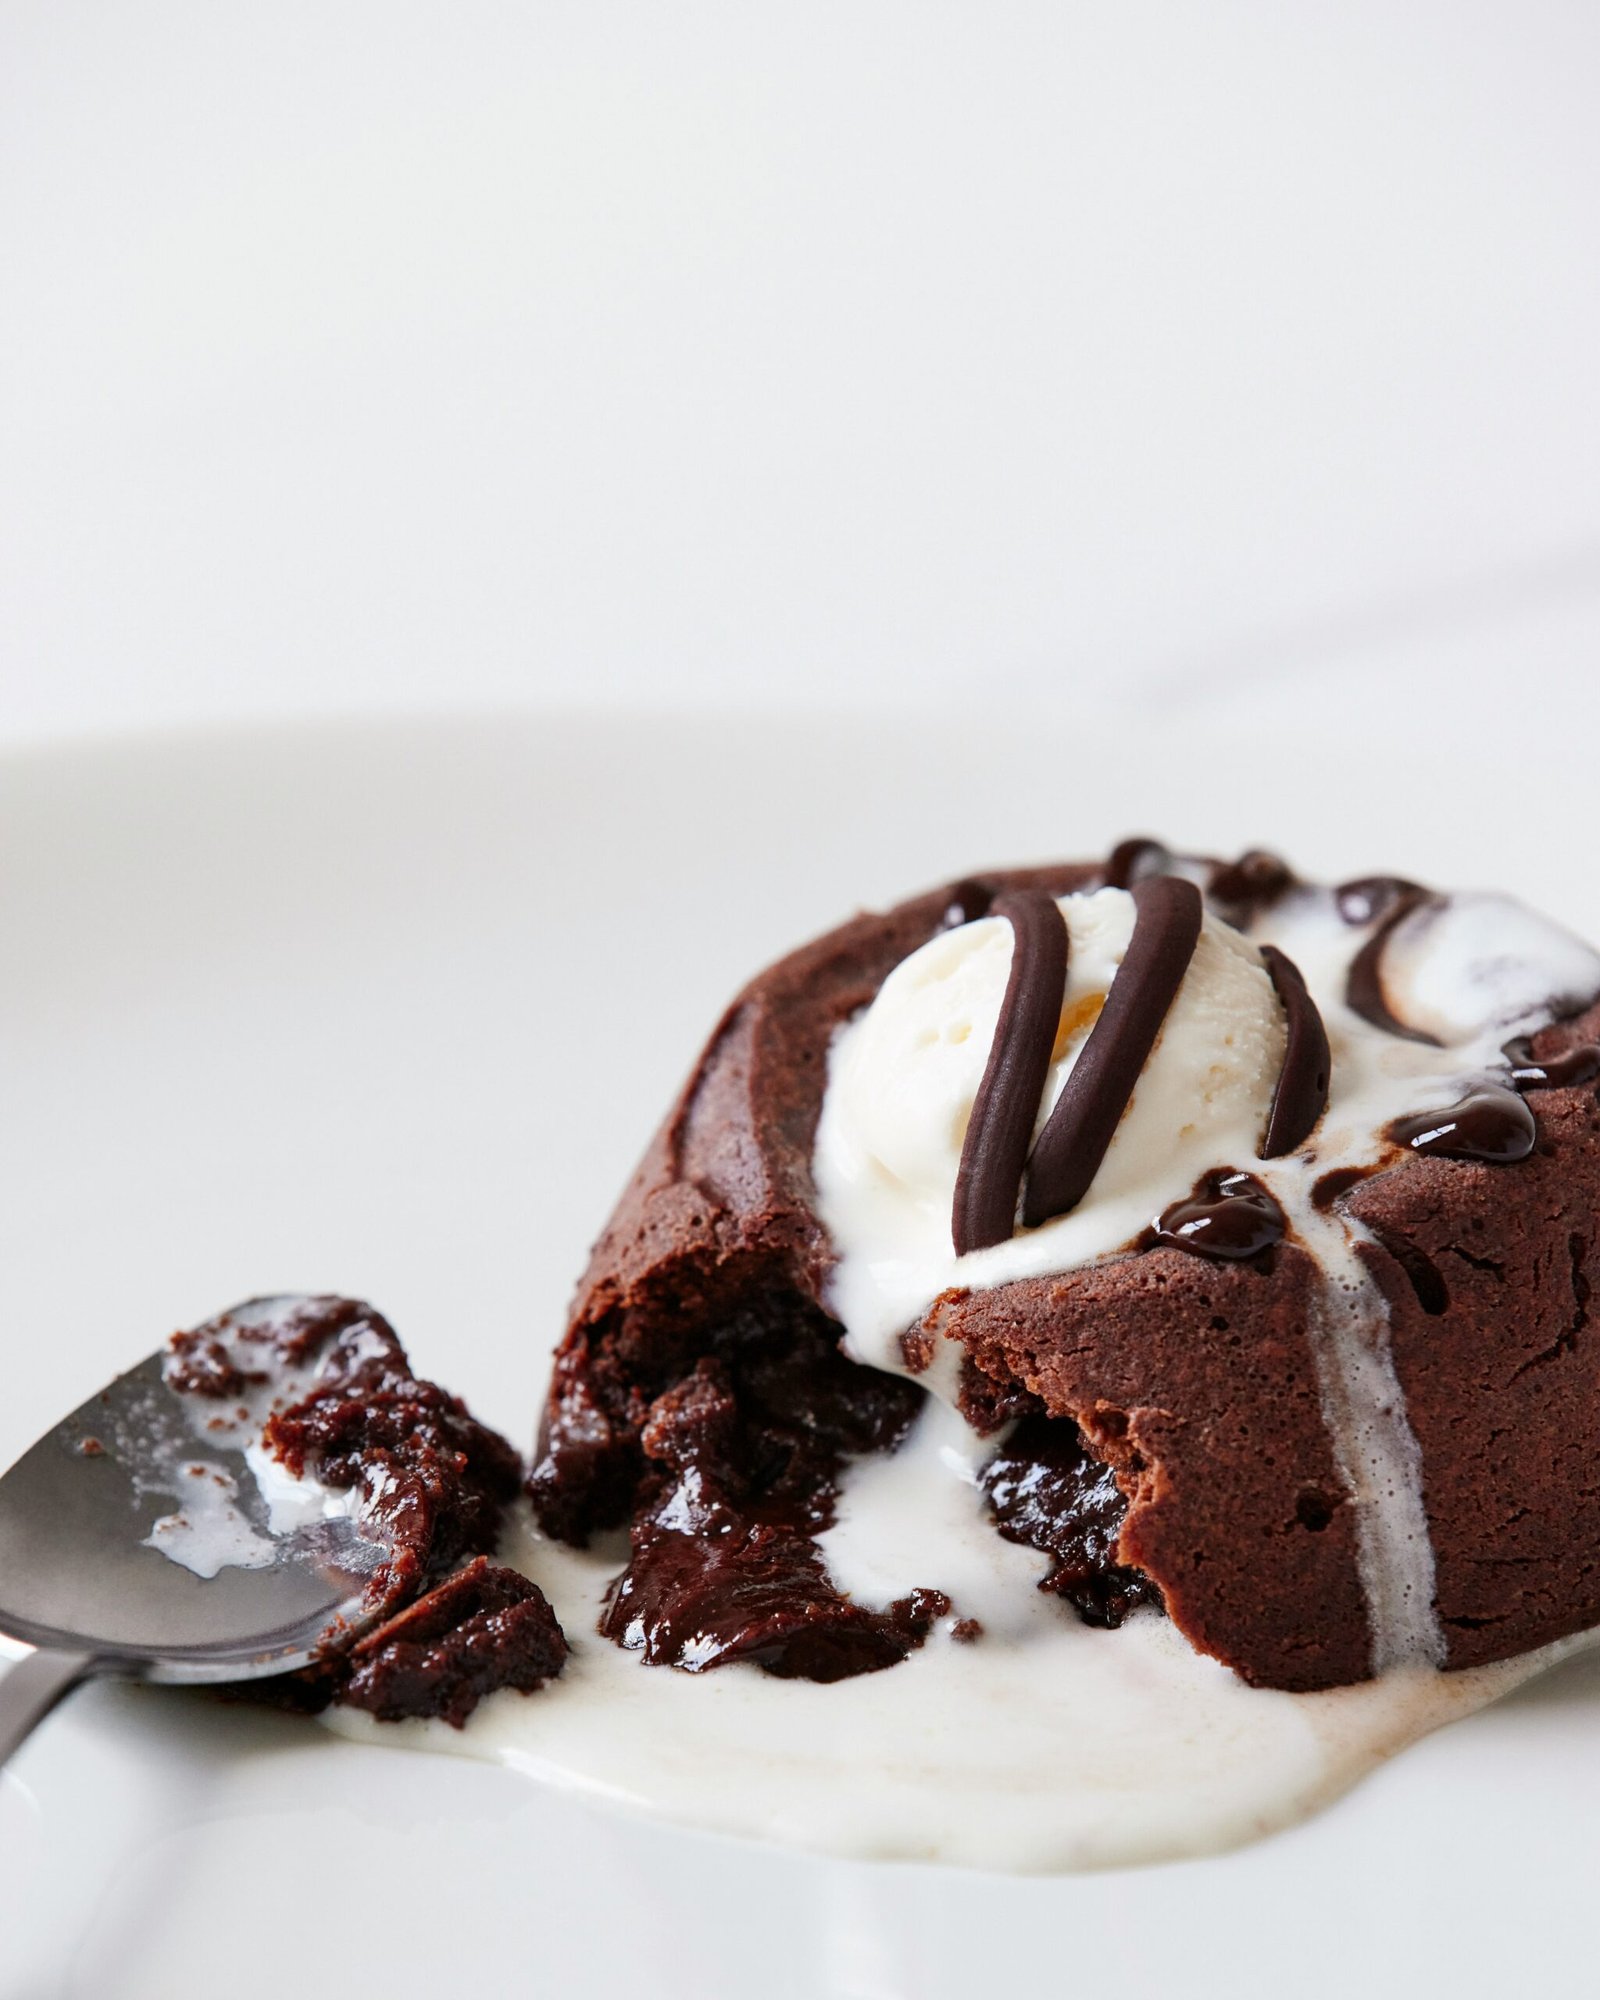 Decadent Chocolate Desserts You Can Make at Home